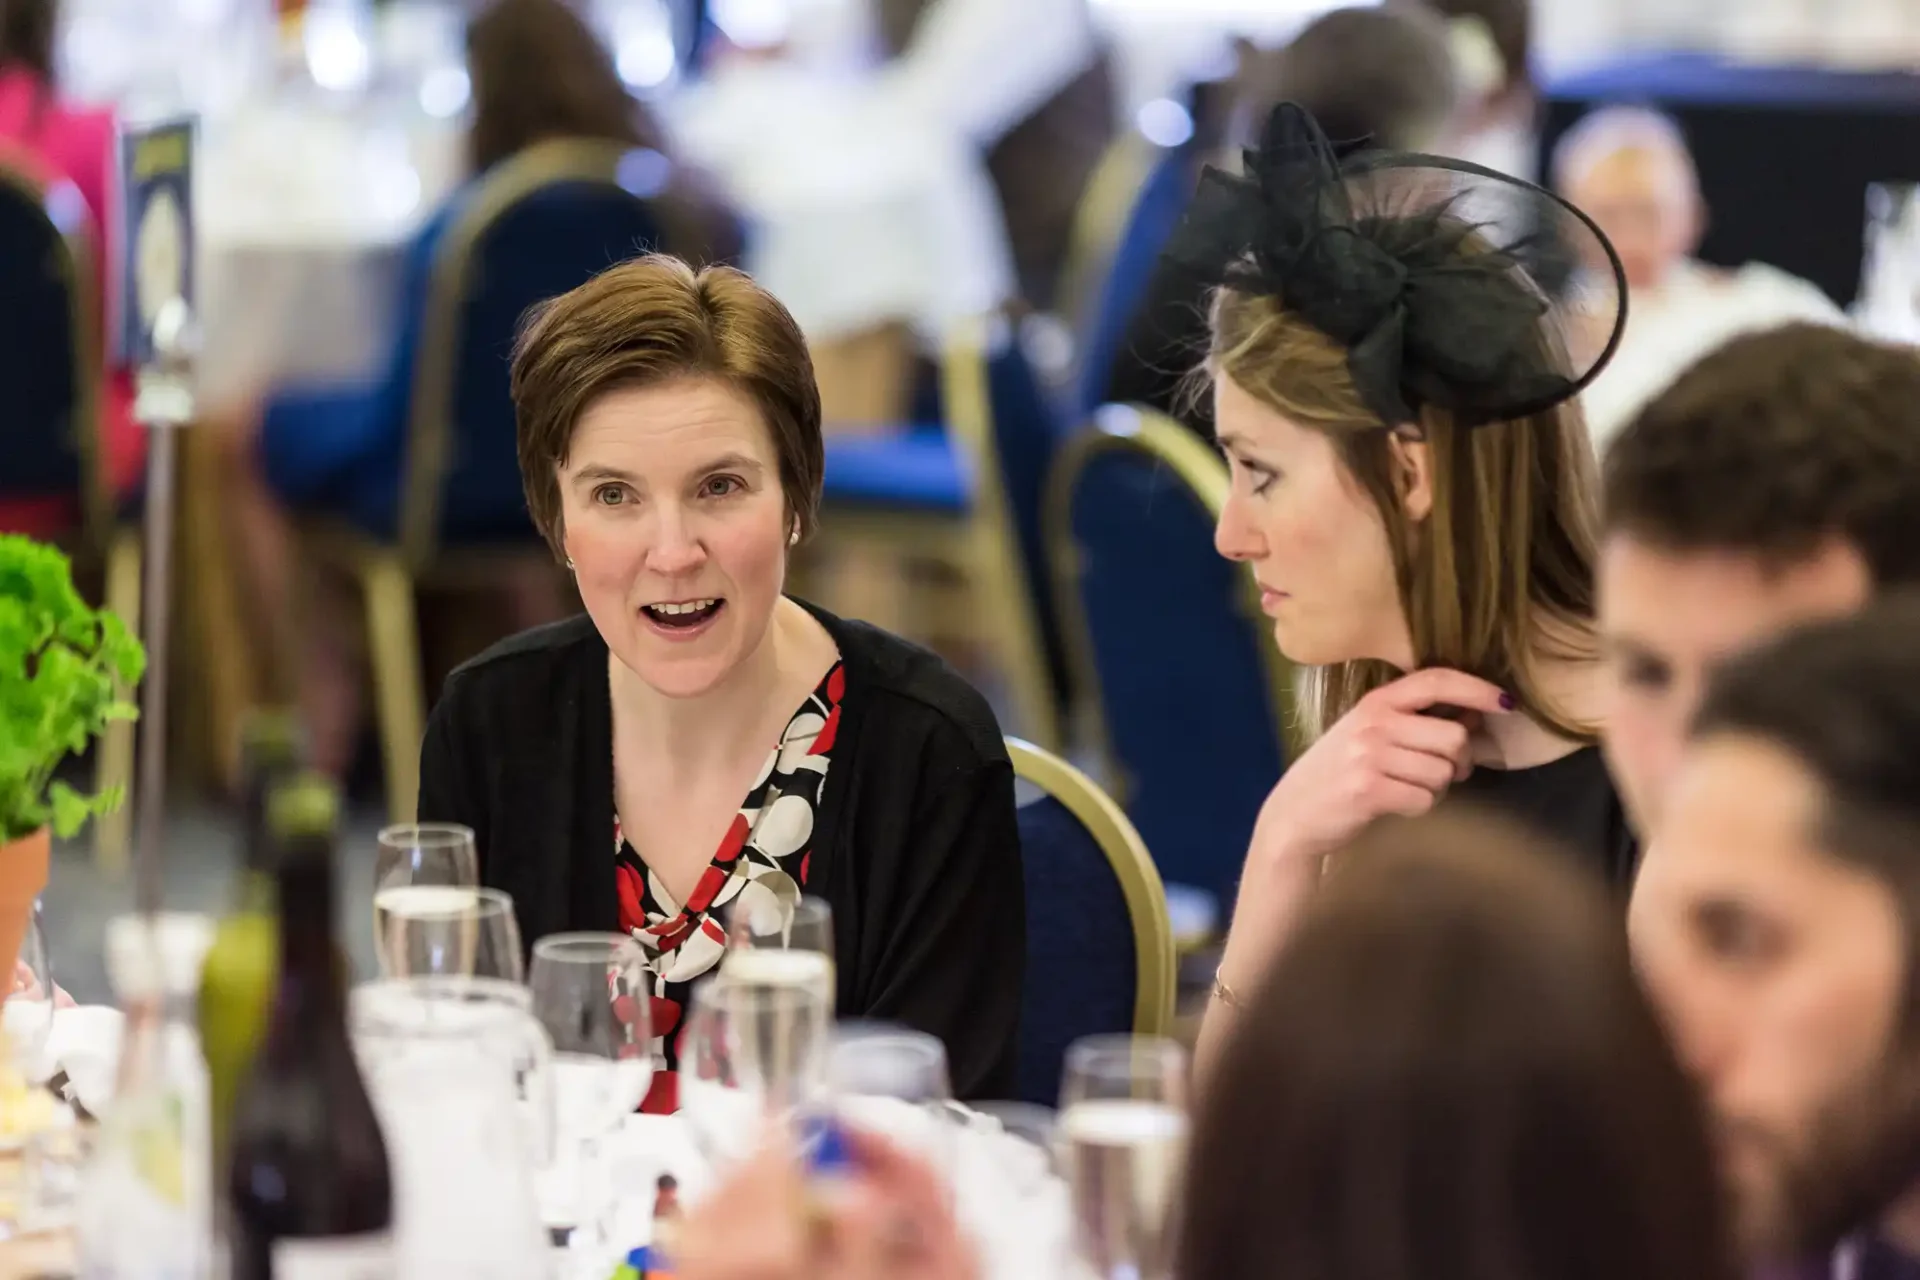 A woman in a black dress and red scarf, smiling at a formal dining event, while another woman in a black fascinator listens intently.